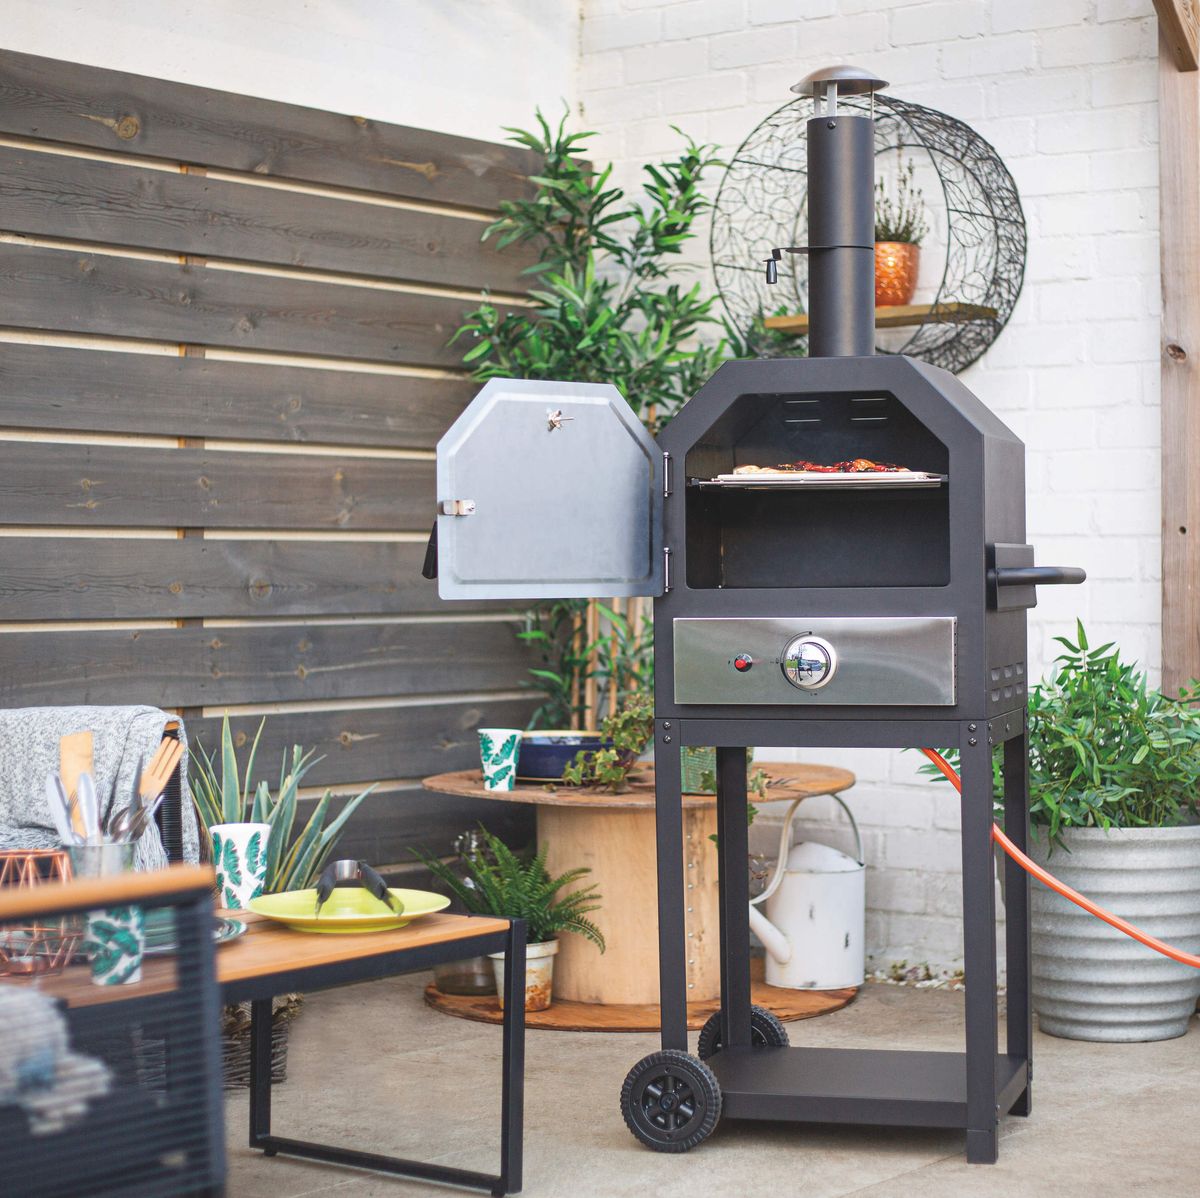 aldi is selling a gas pizza oven — aldi special buys